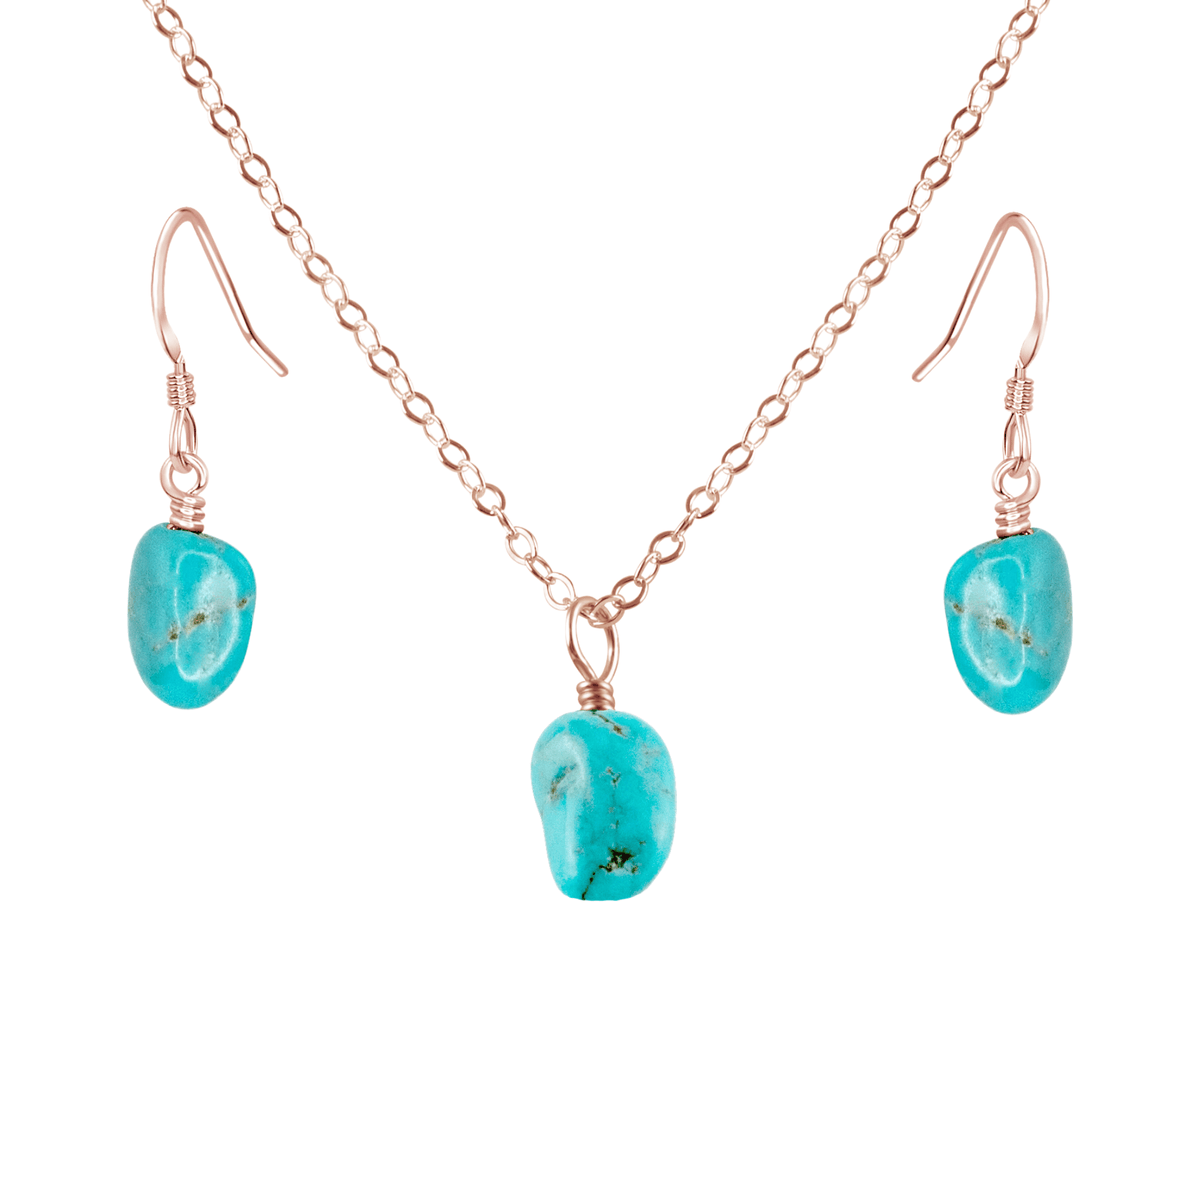 Raw Turquoise Crystal Earrings & Necklace Set